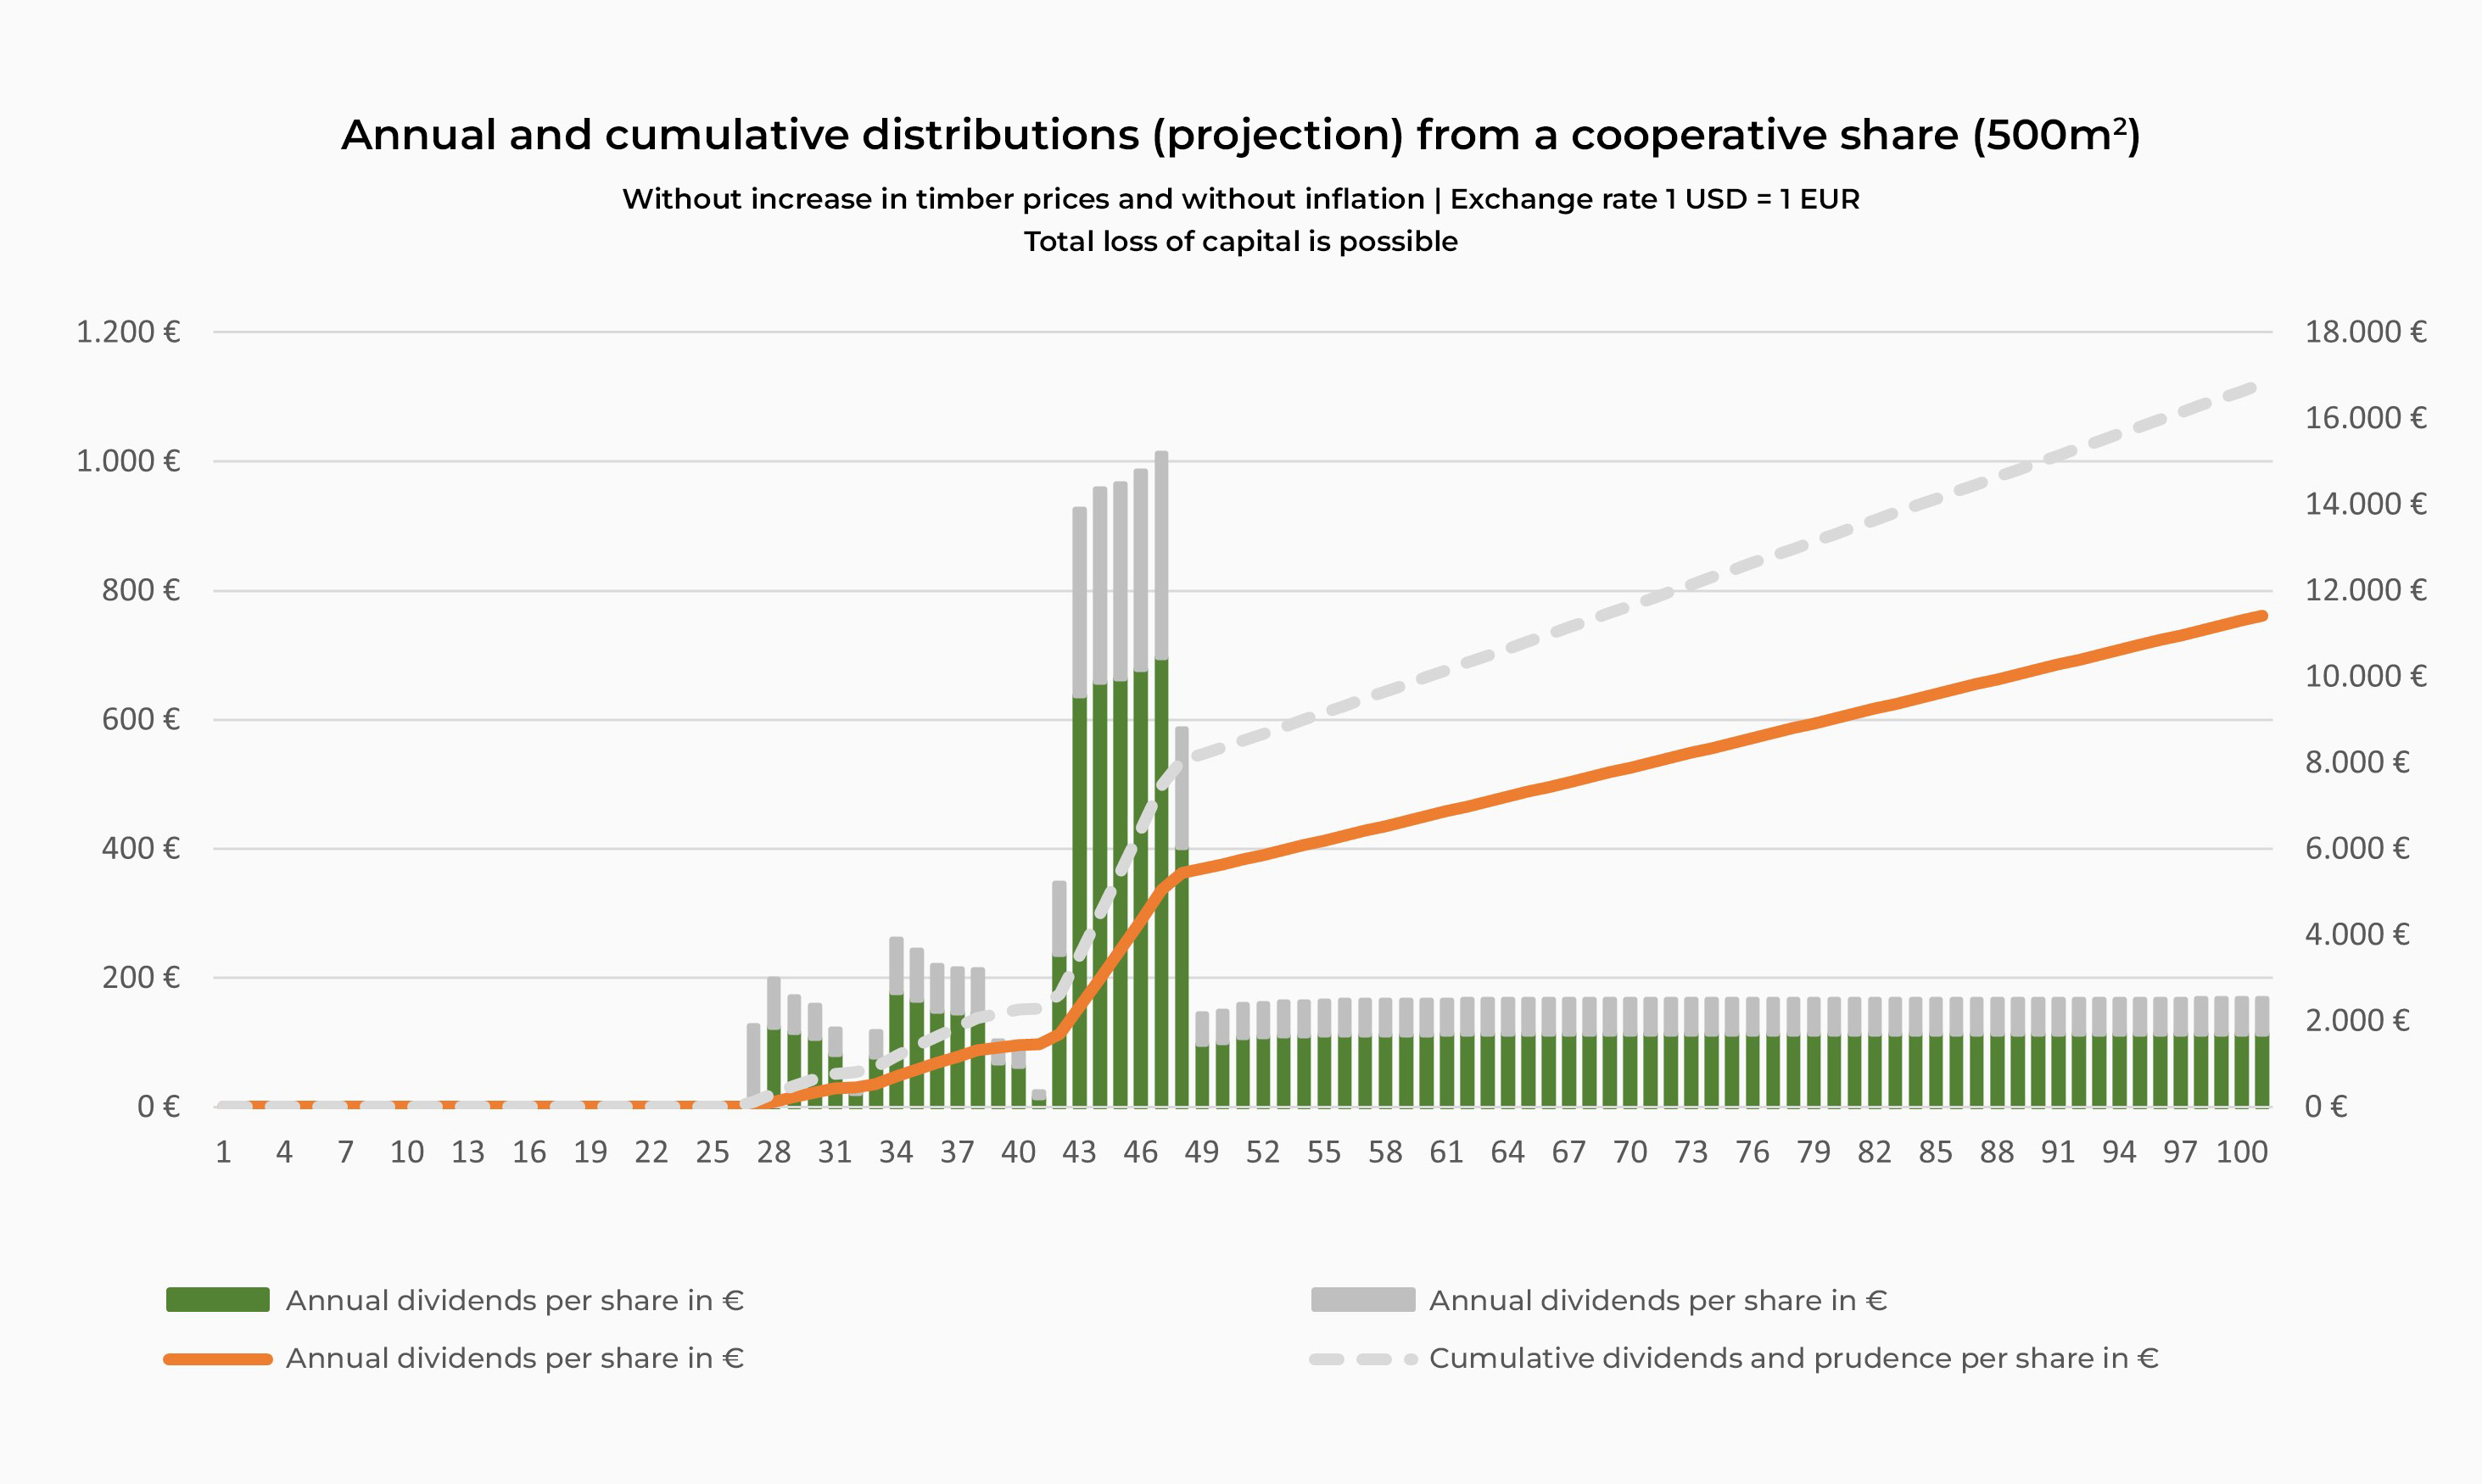 Annual and cumulative distributions (projection) from one cooperative share (500 m2)